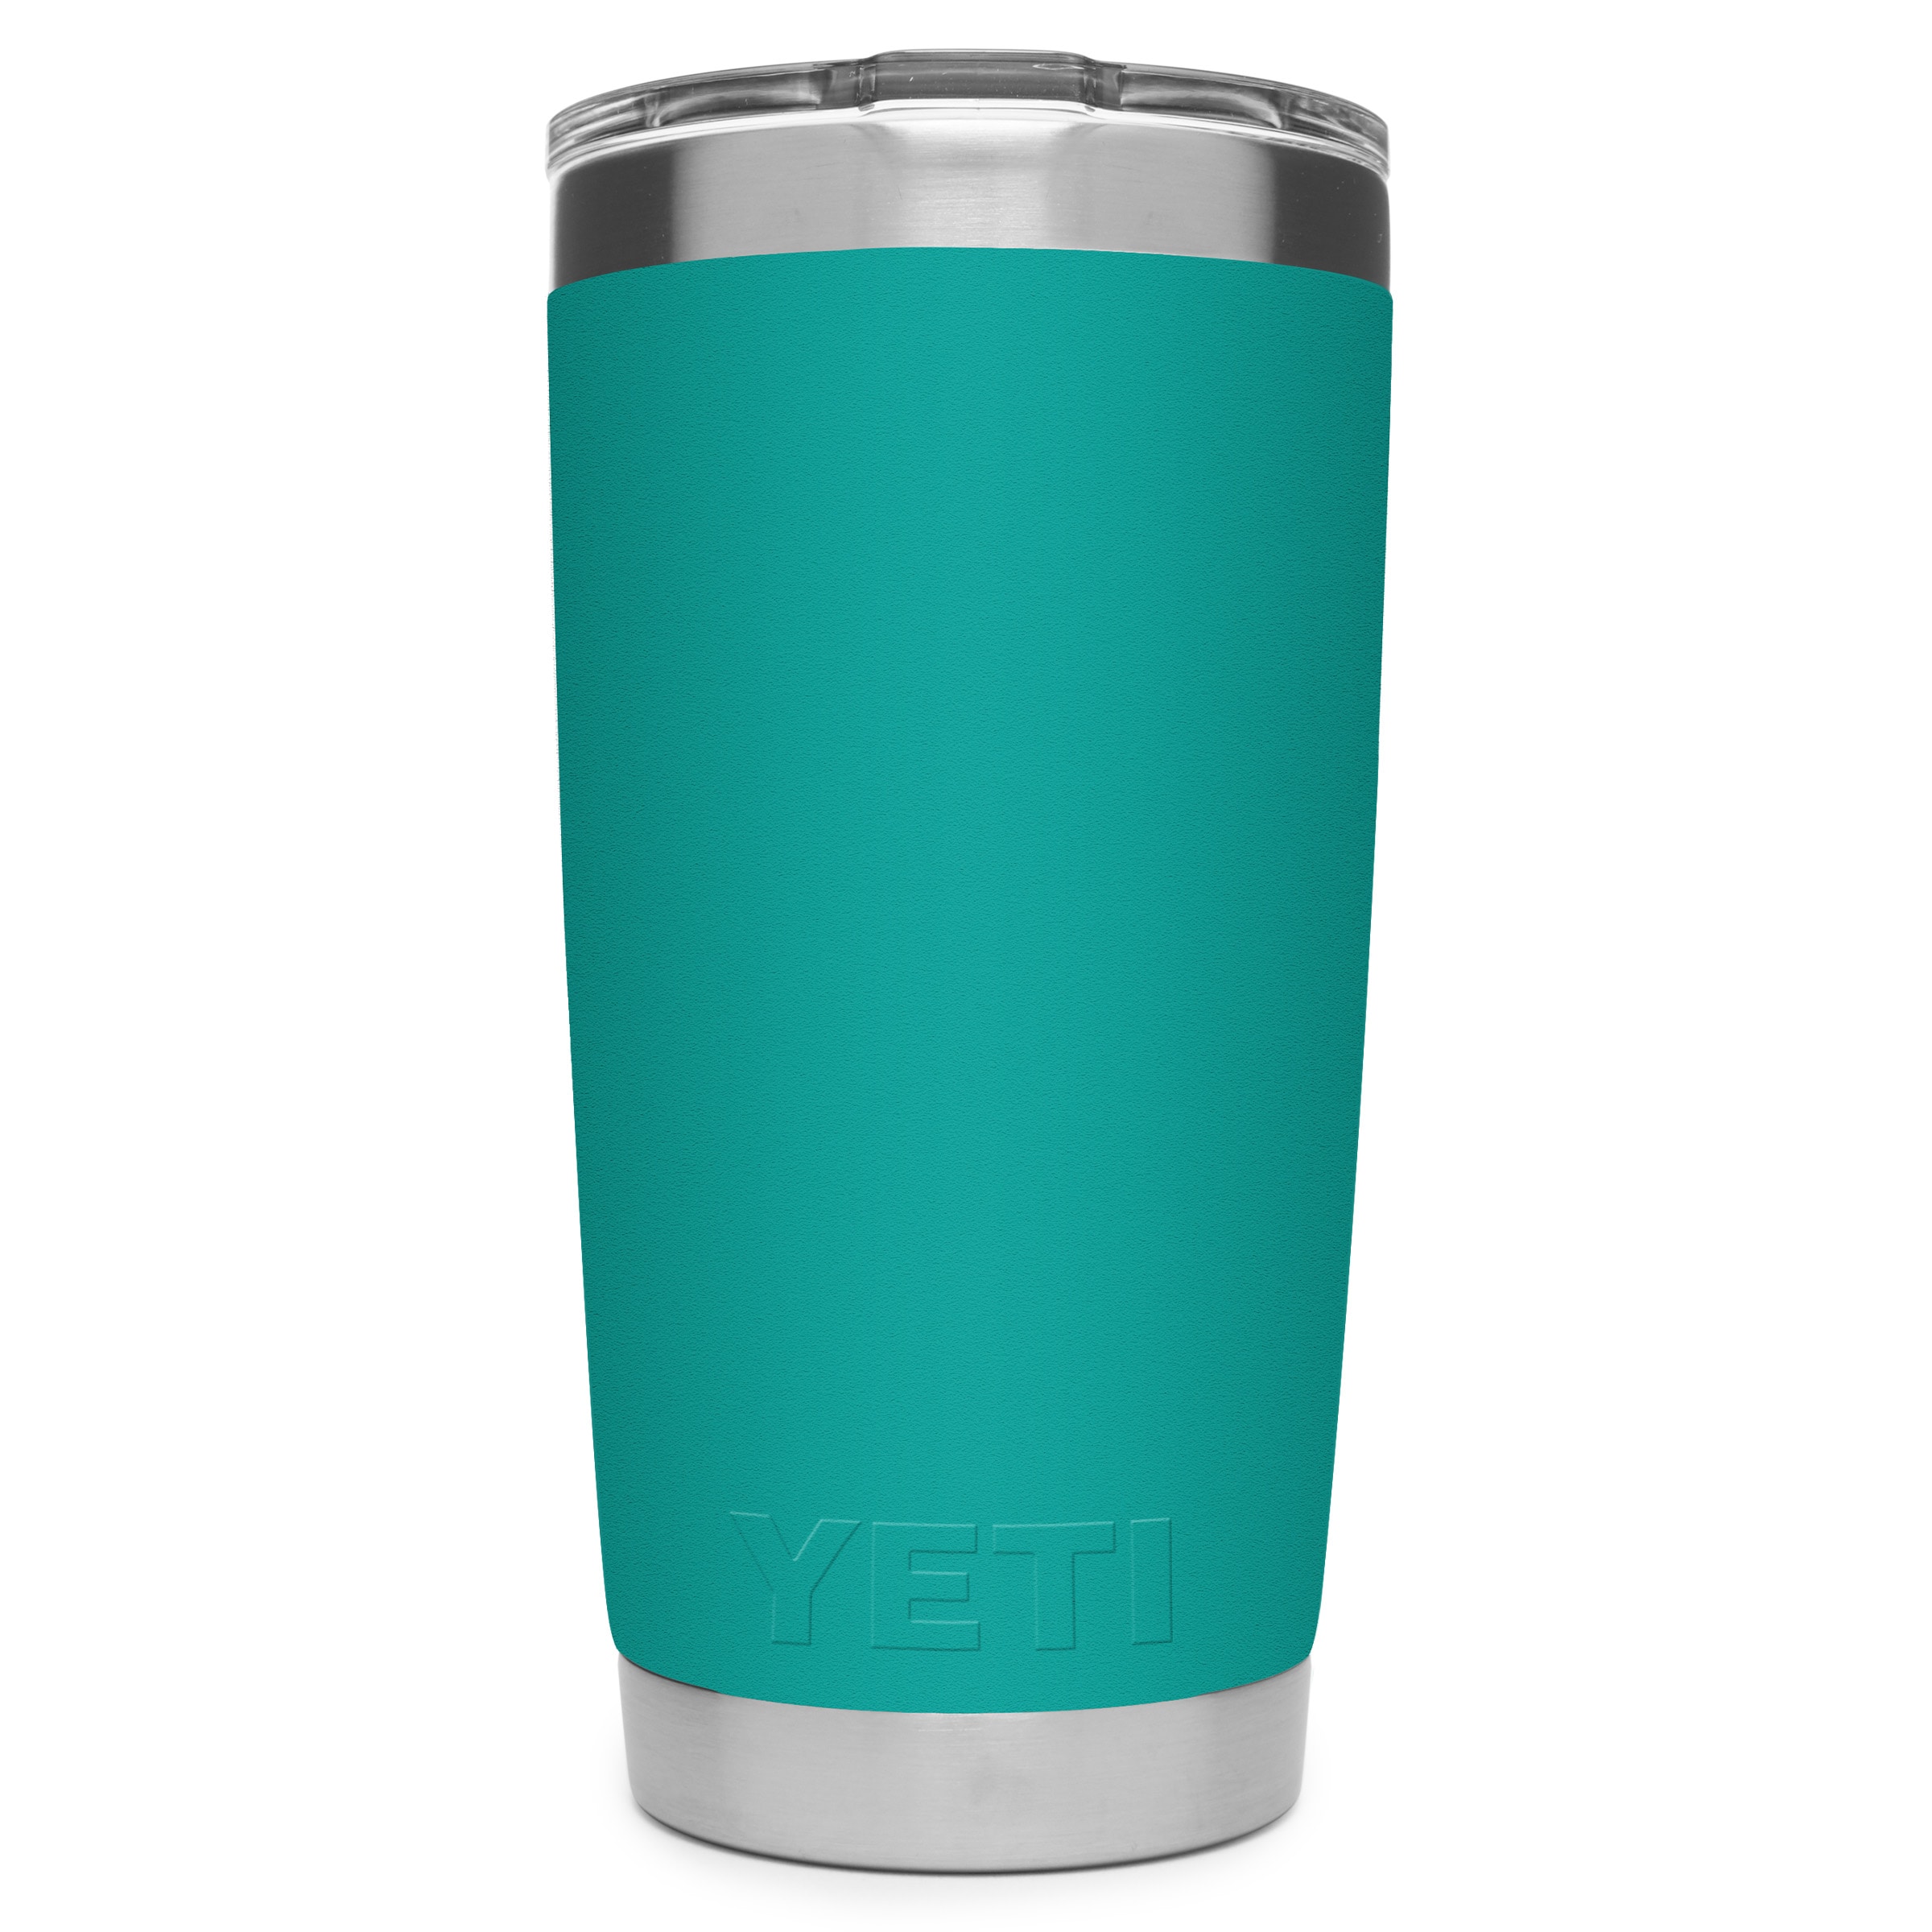 Now I guess I need to finish a reef blue collection : r/YetiCoolers